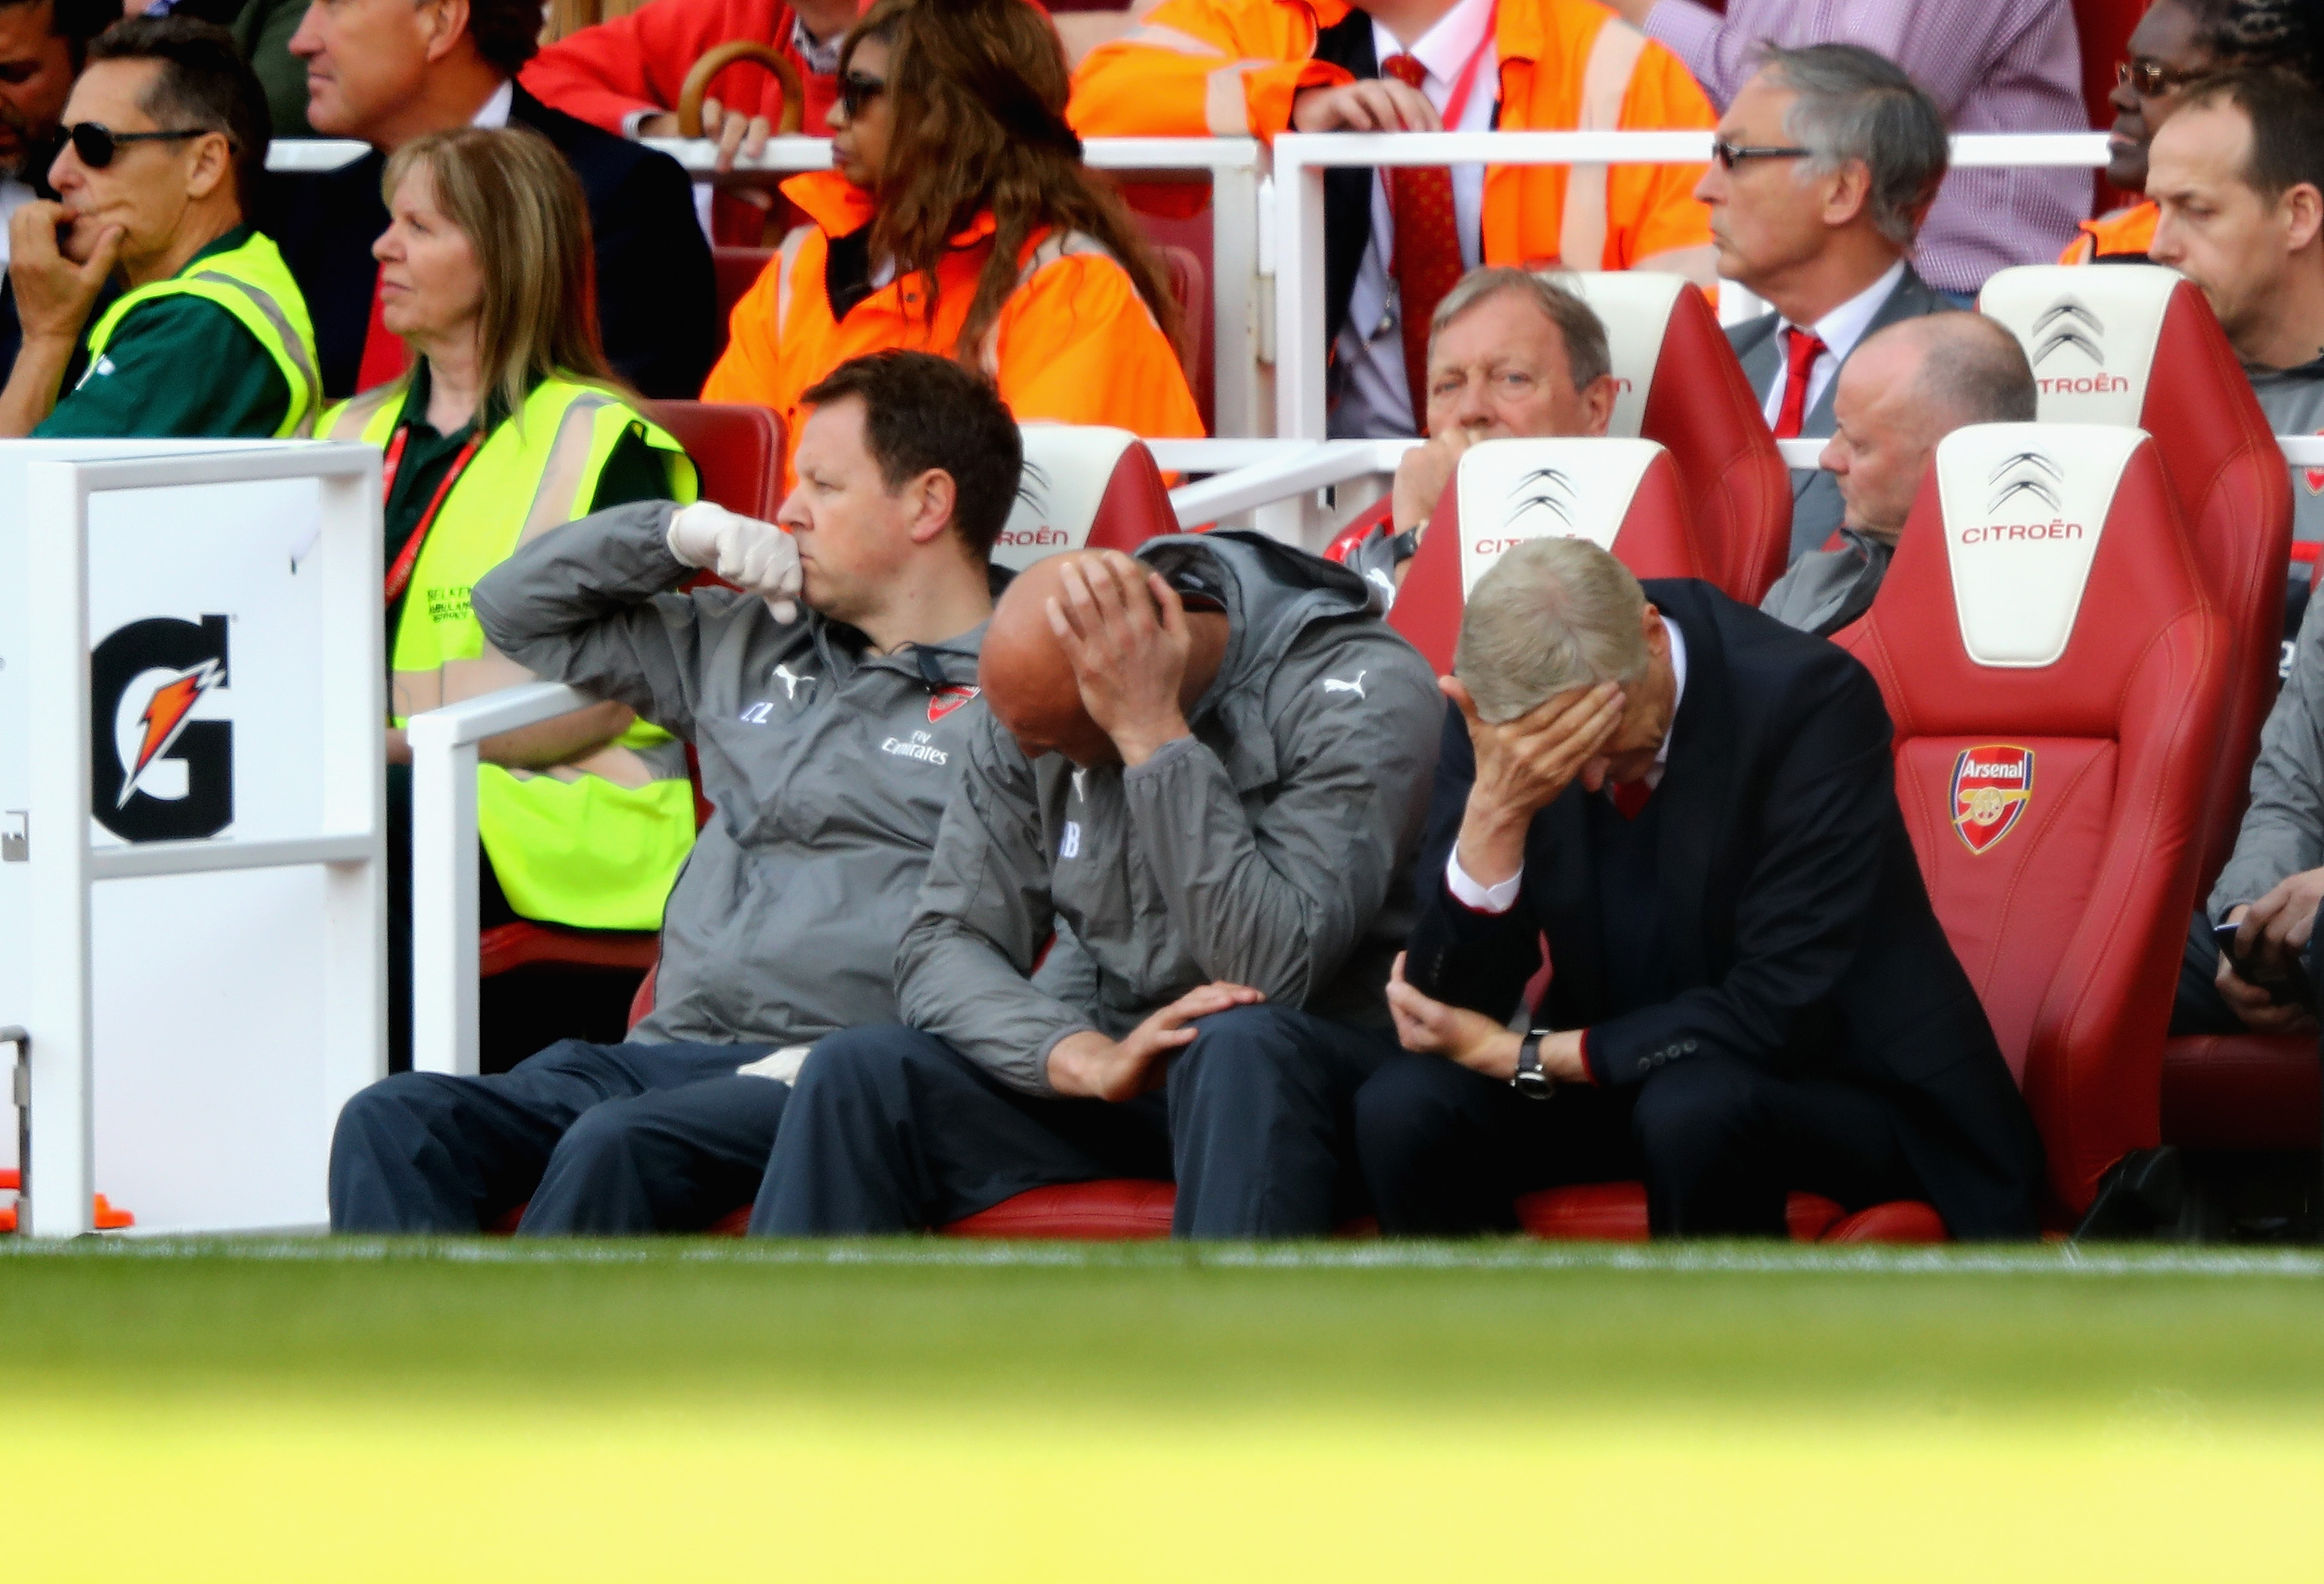 LONDON, ENGLAND - MAY 21:  Arsene Wenger of Arsenal looks on during the Premier League match between Arsenal and Everton at Emirates Stadium on May 21, 2017 in London, England.  (Photo by Clive Mason/Getty Images)